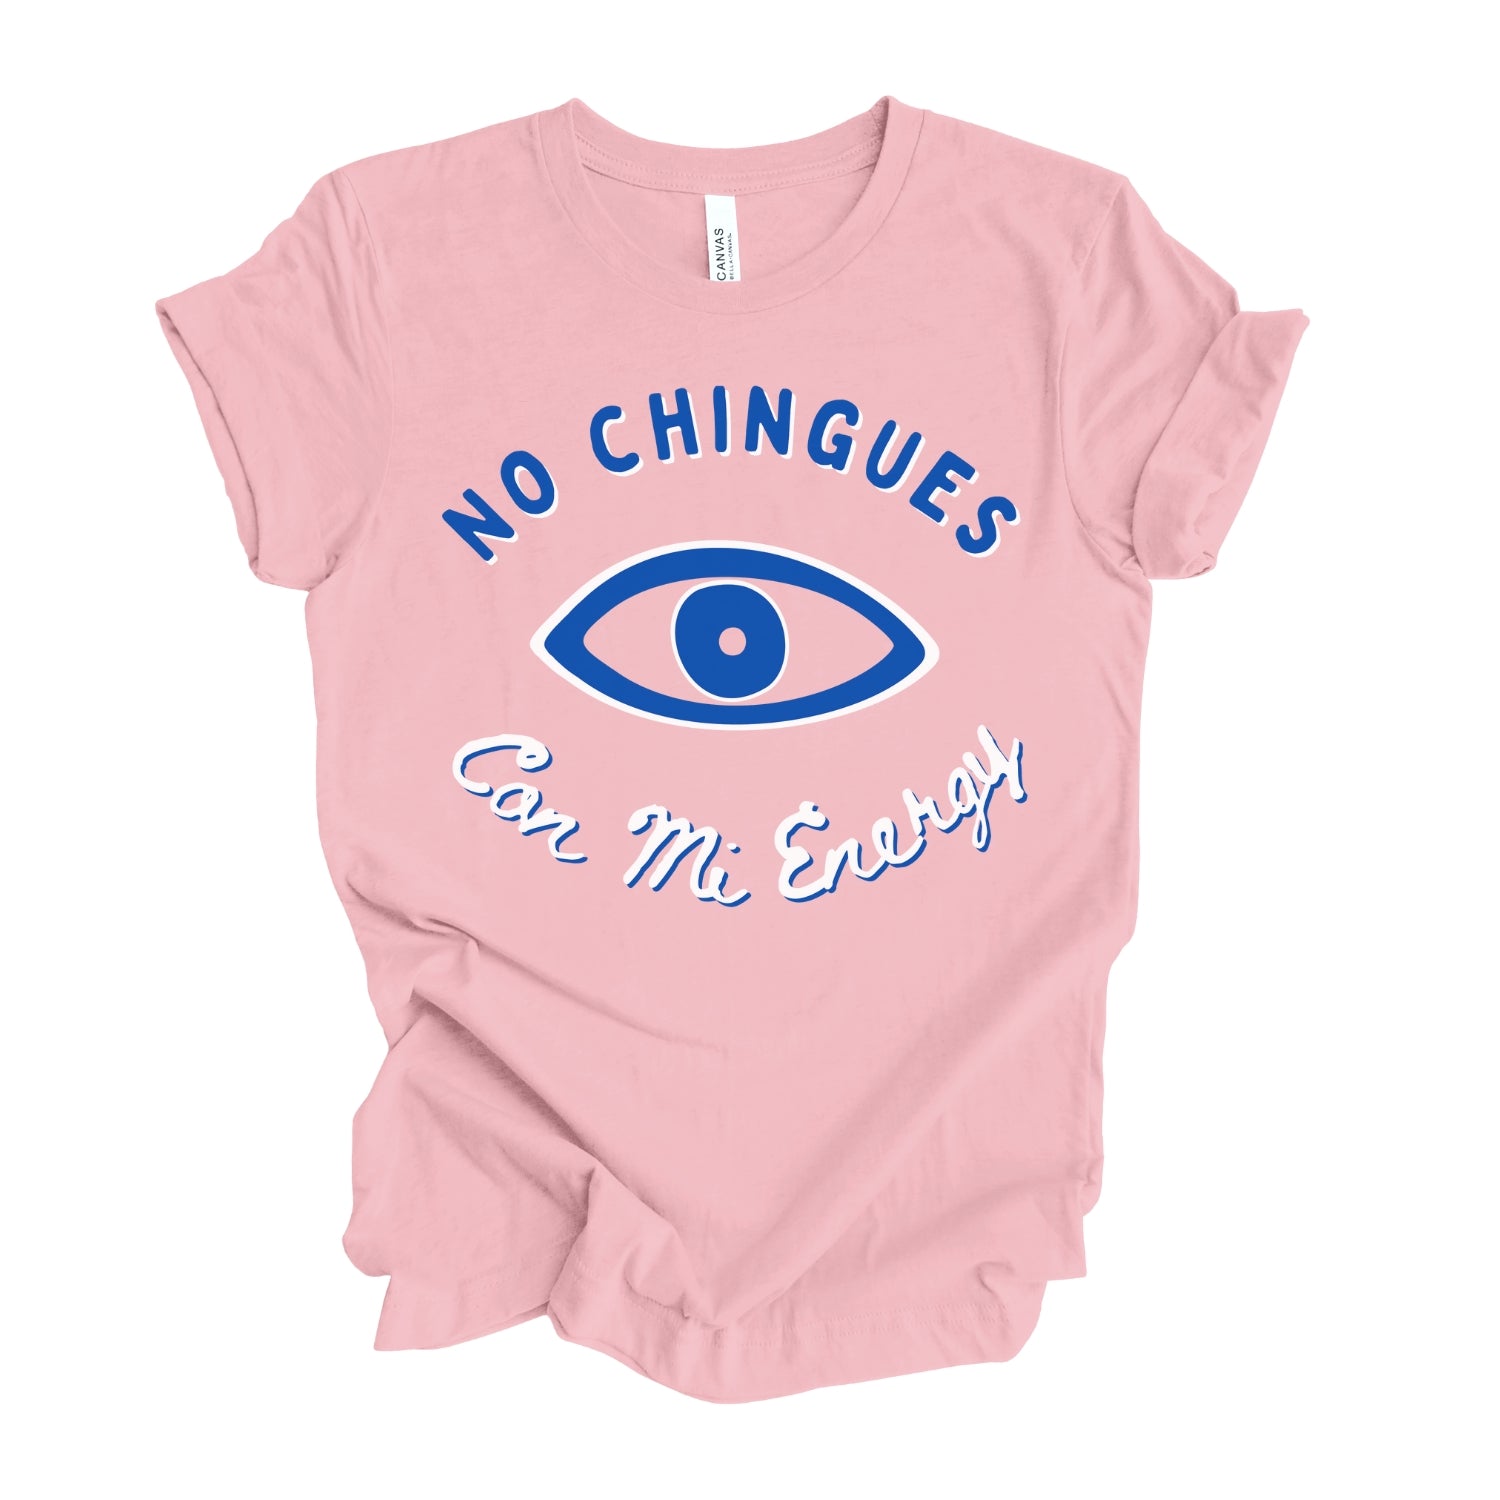 Pink t-shirt featuring stylized evil eye and text 'no chingues con mi energy'